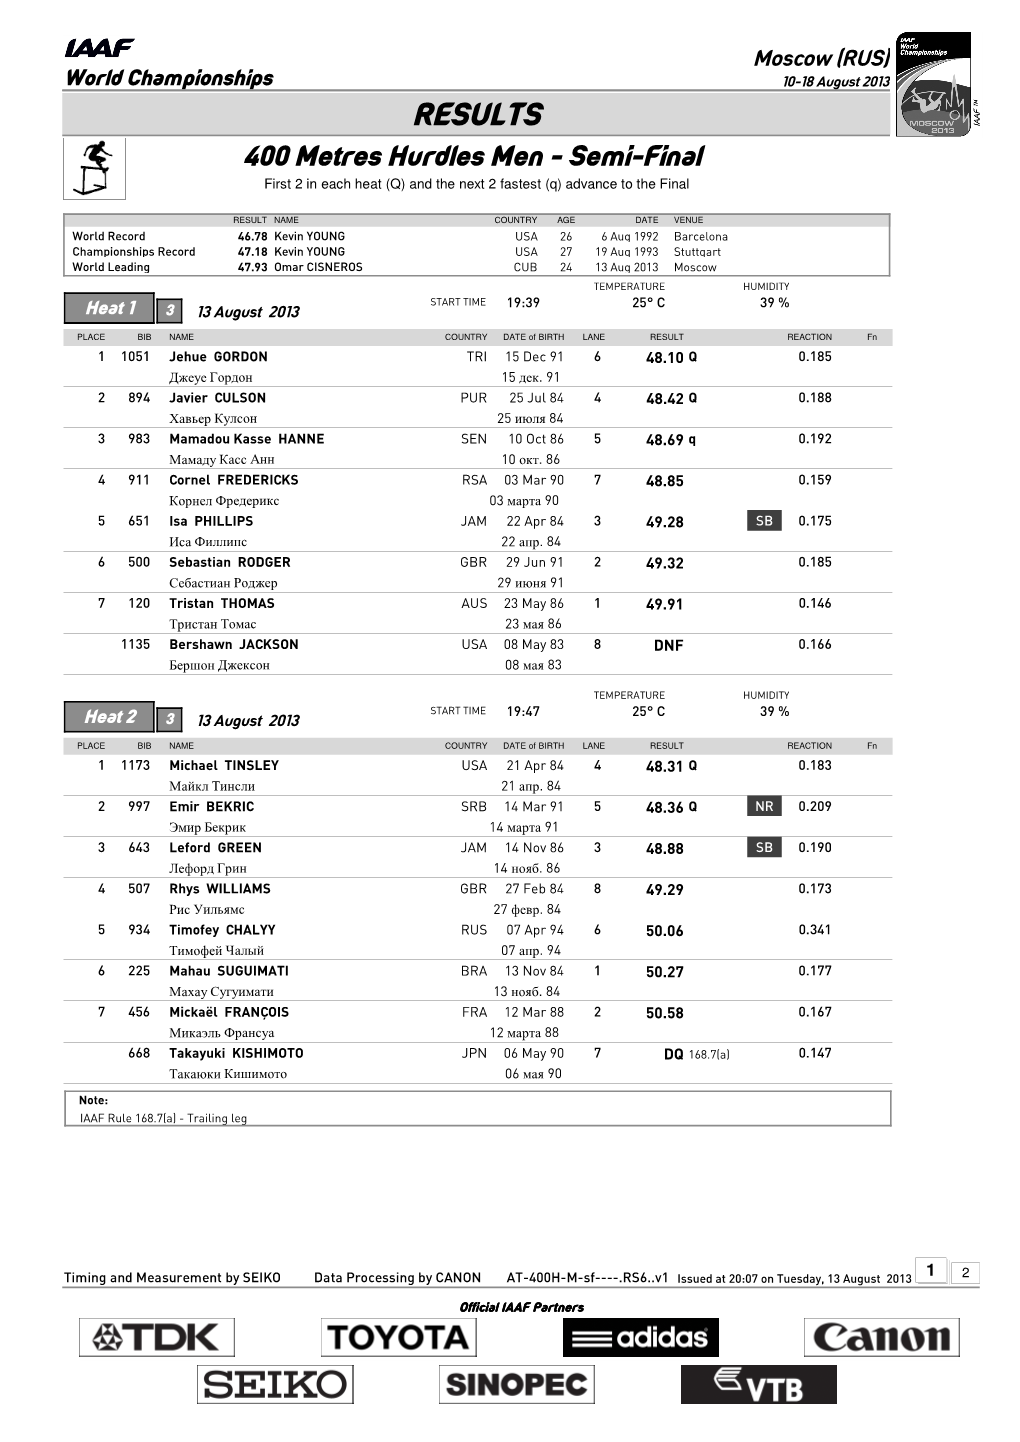 RESULTS 400 Metres Hurdles Men - Semi-Final First 2 in Each Heat (Q) and the Next 2 Fastest (Q) Advance to the Final